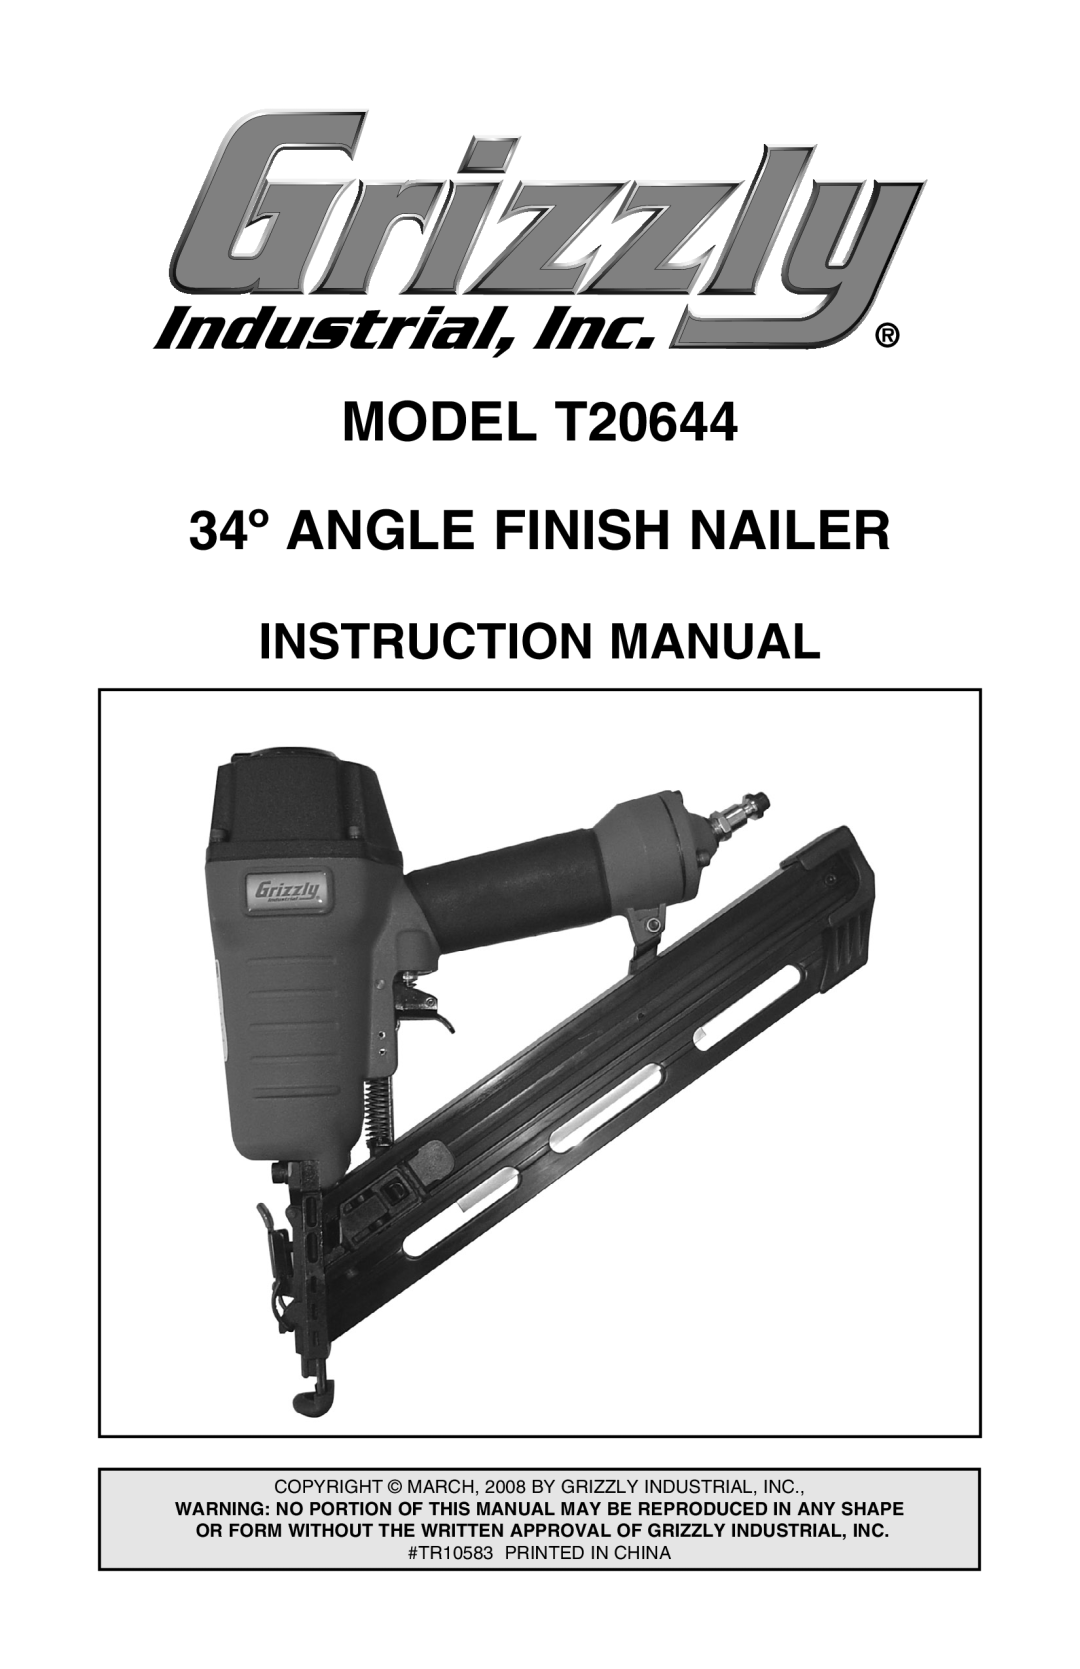 Grizzly instruction manual MODEL T20644 34º ANGLE FINISH NAILER, Instruction Manual 